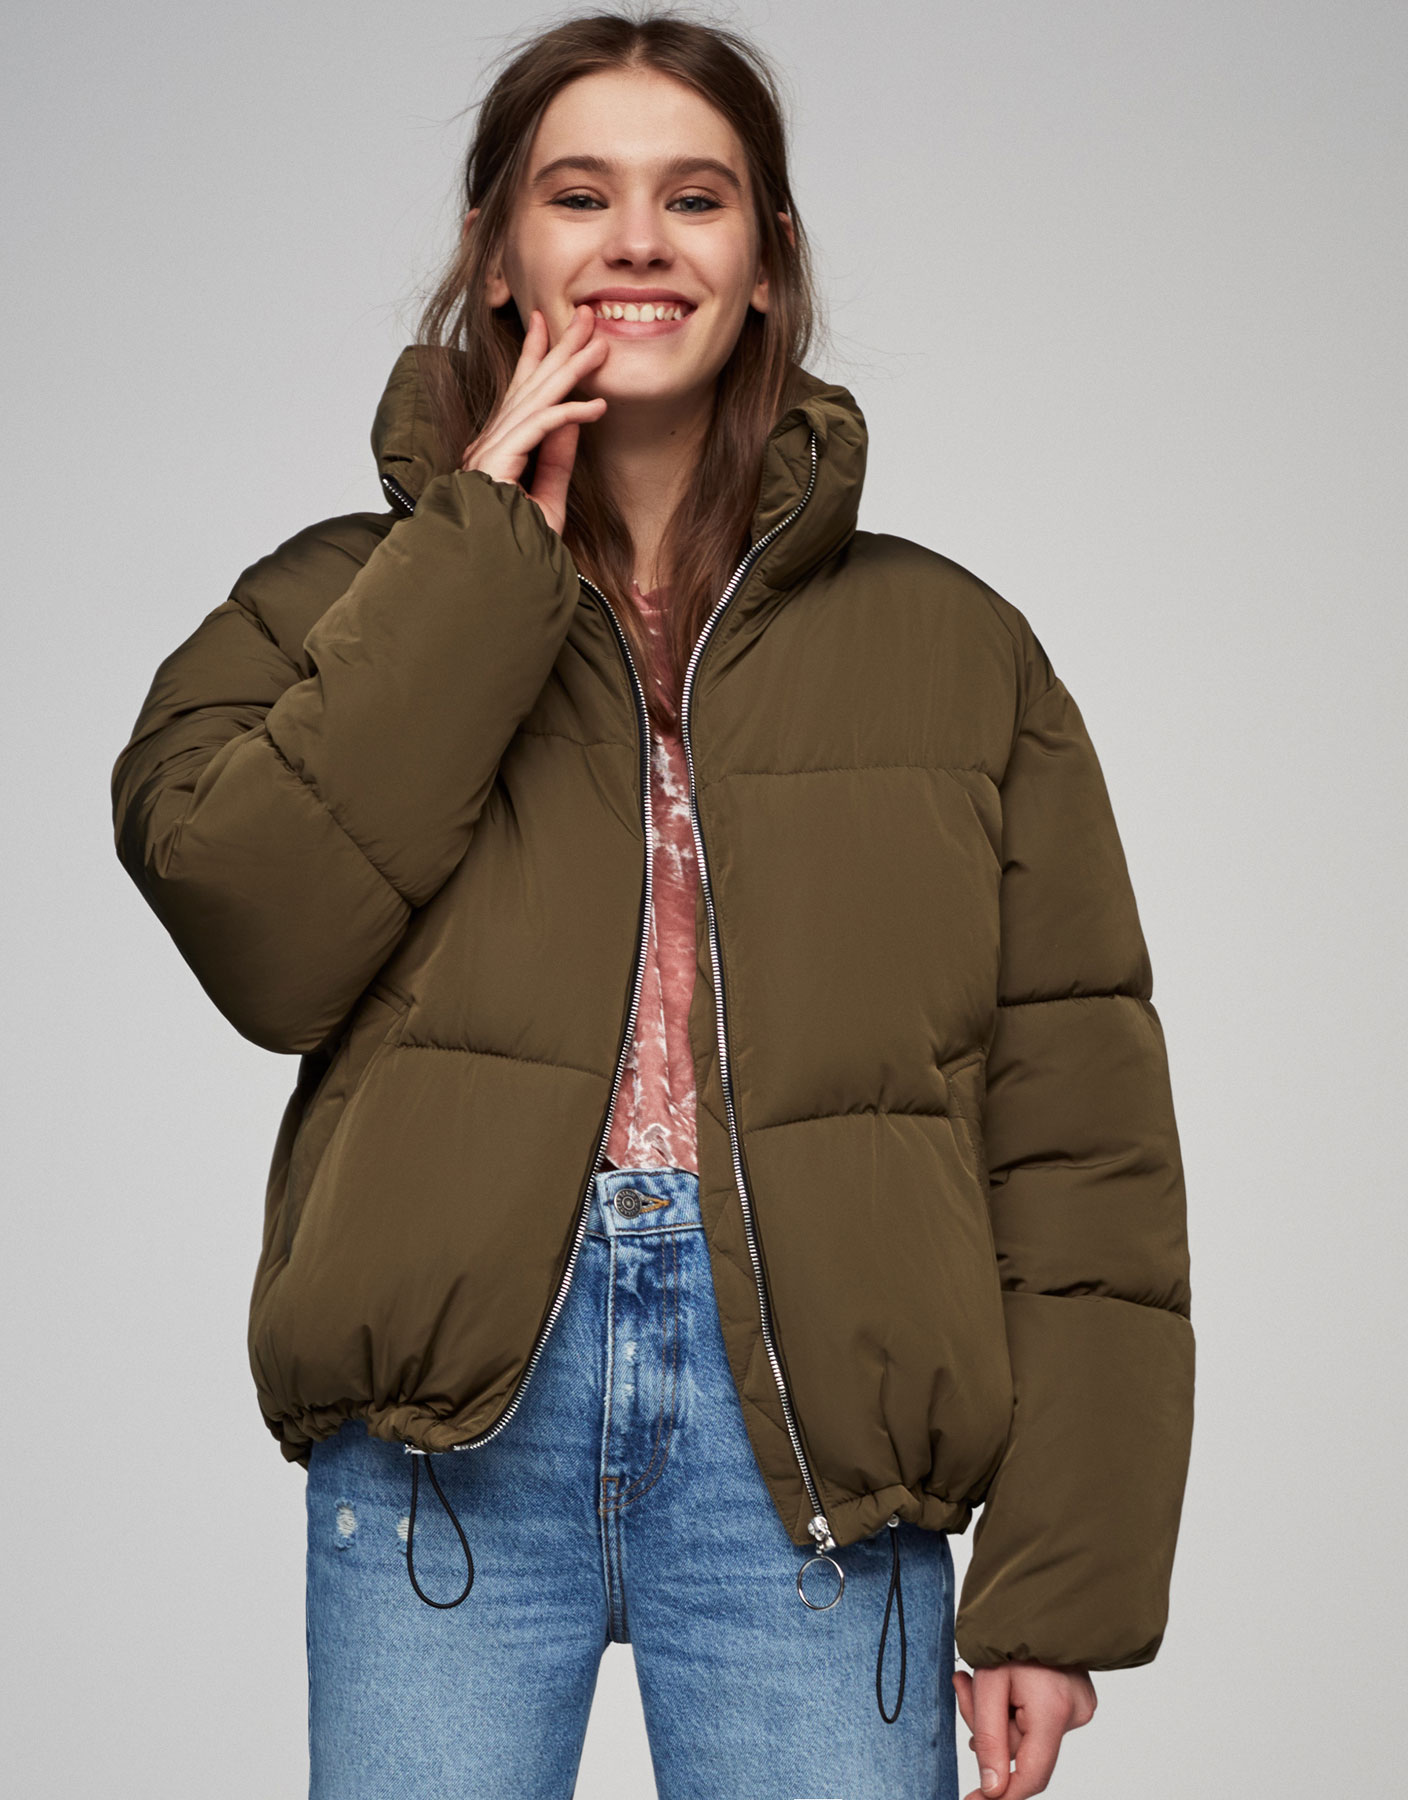 Women's Coats and Jackets for Spring/Summer 2017 | PULL&BEAR